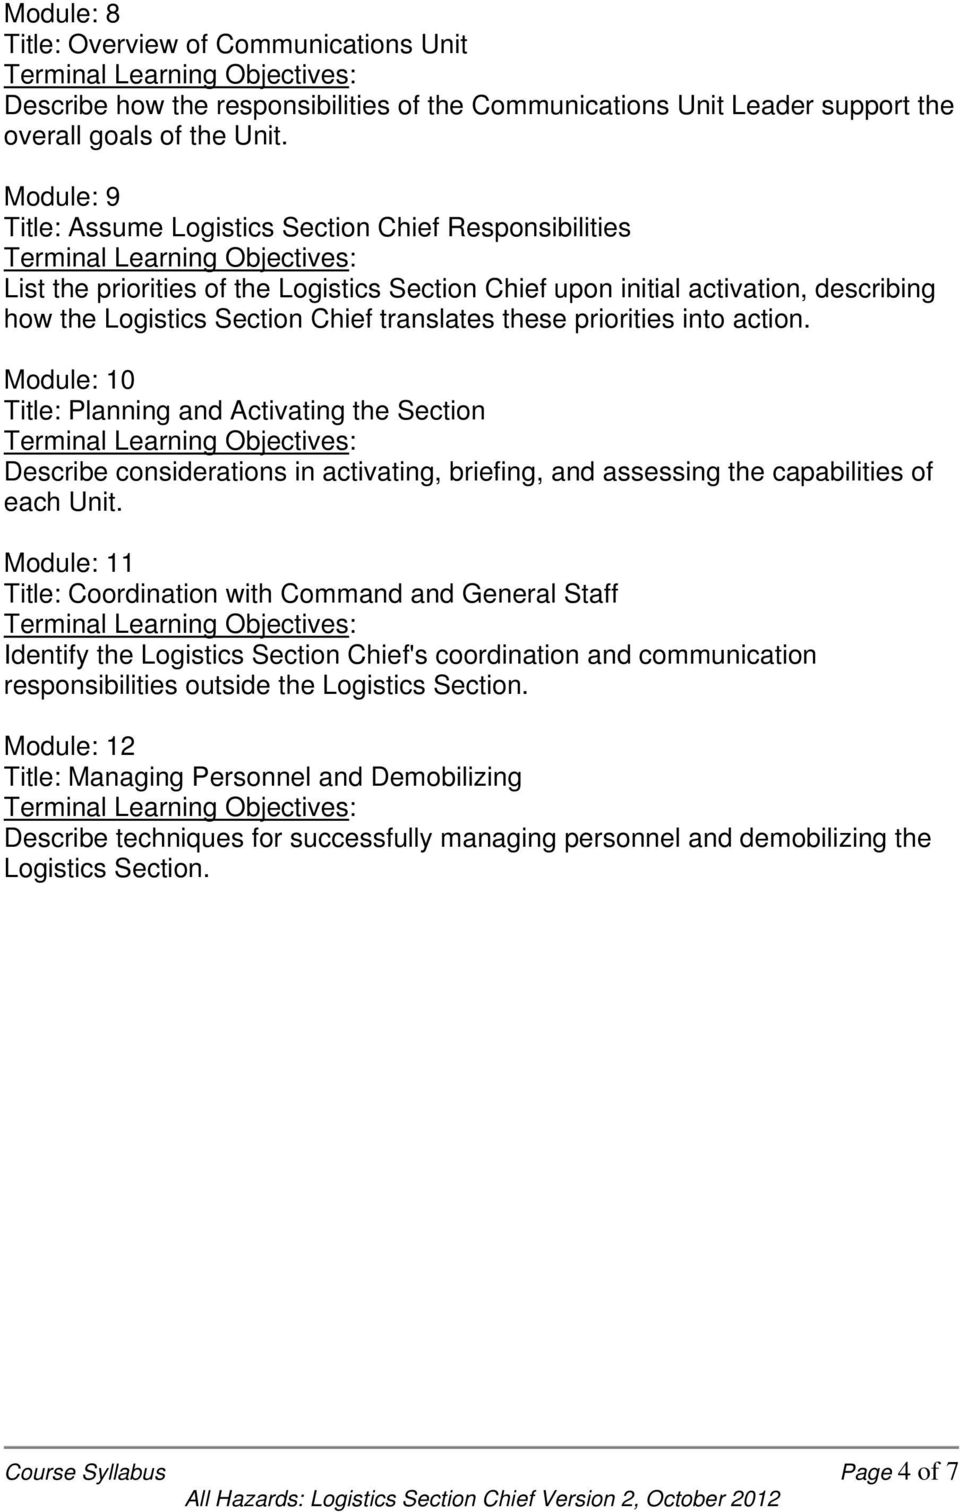 these priorities into action. Module: 10 Title: Planning and Activating the Section Describe considerations in activating, briefing, and assessing the capabilities of each Unit.